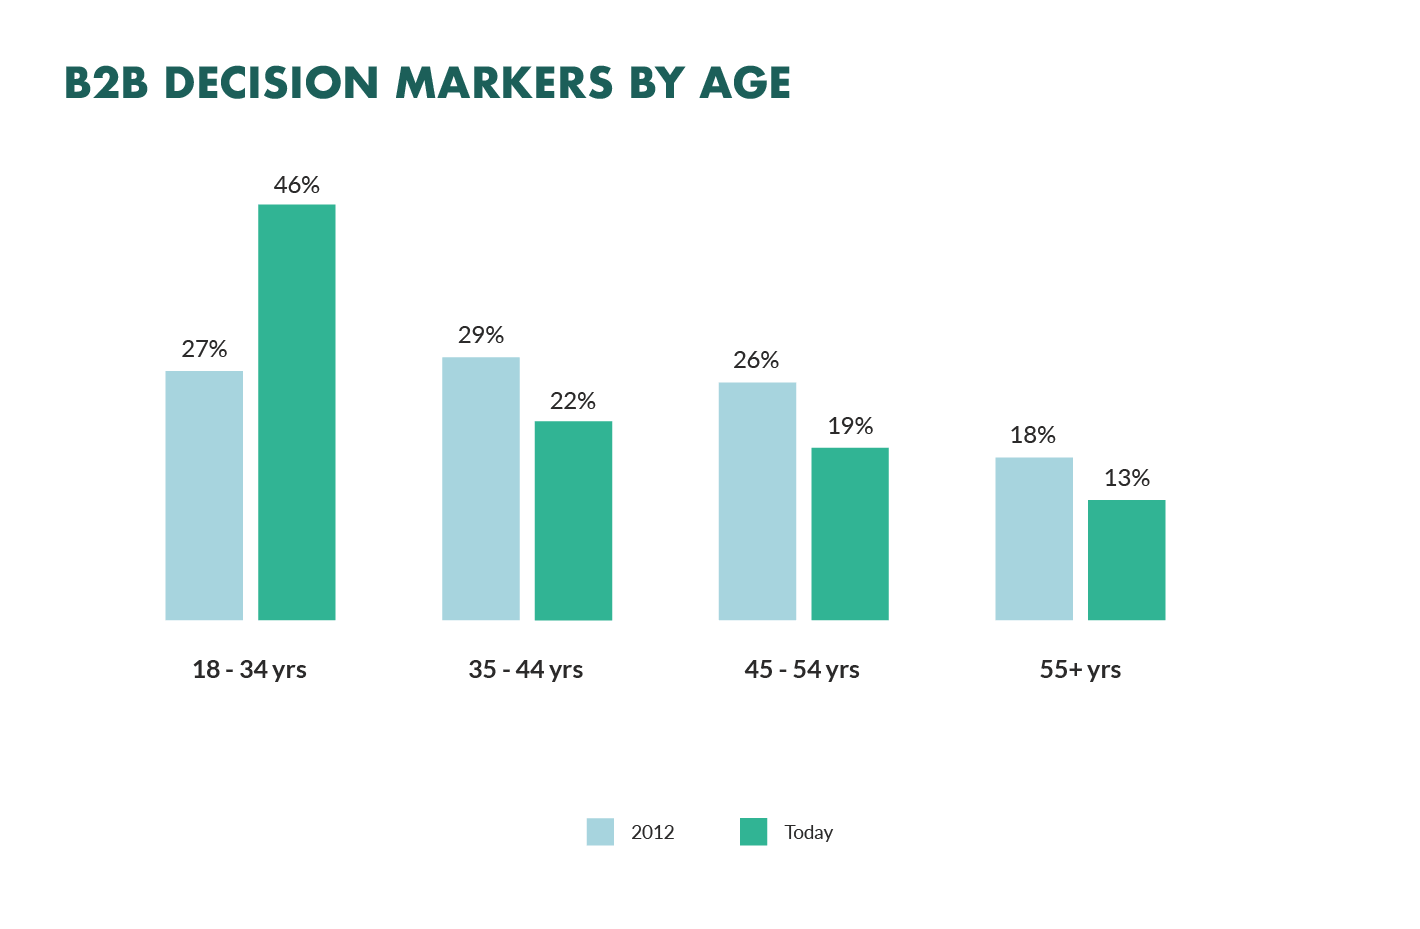 B2B decision makers by age